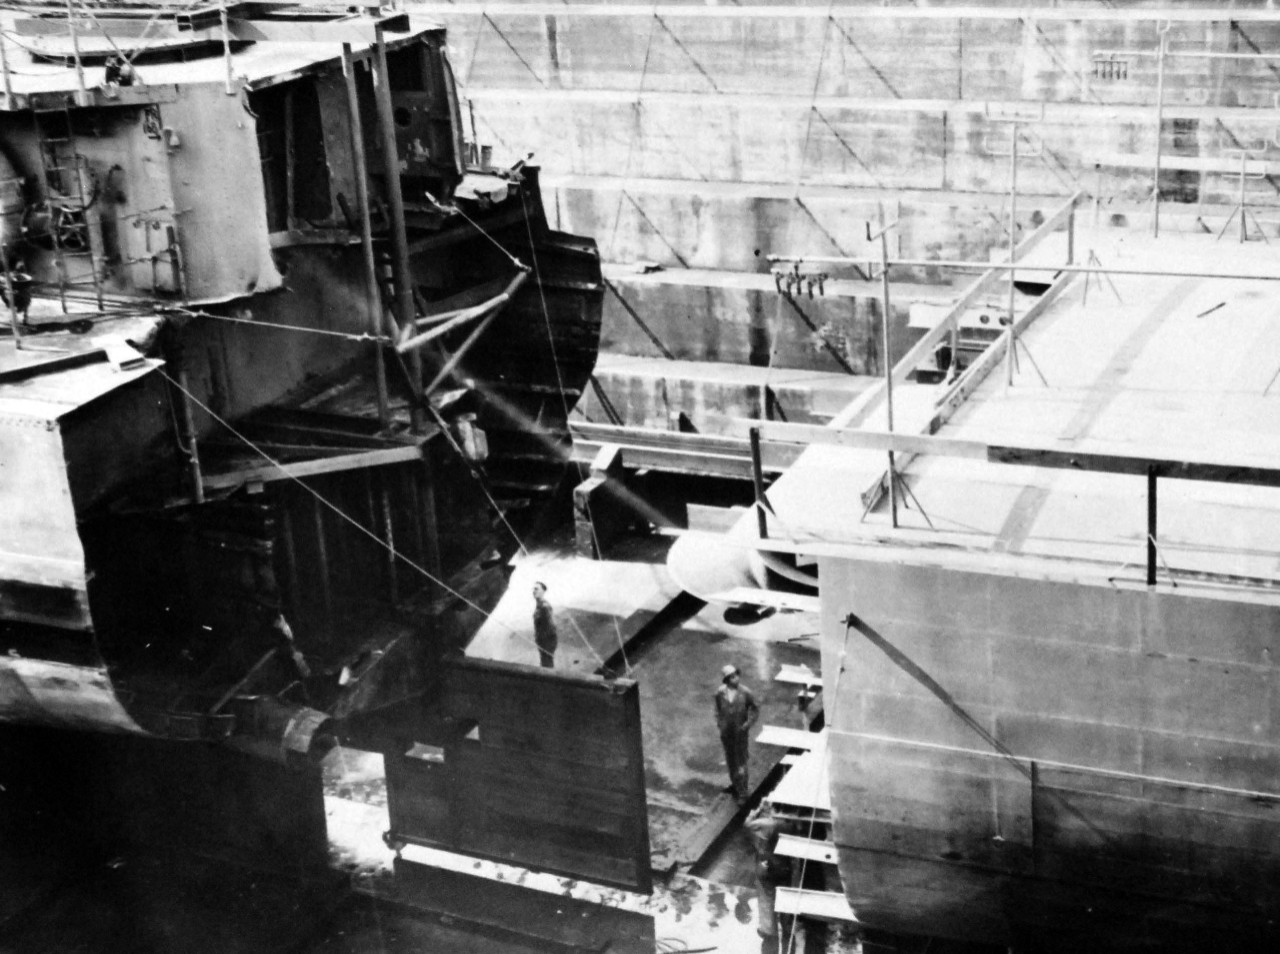 80-G-44452: Aleutian Island Campaign, June 1942-August 1943.    Mine in Alaskan waters blew stern off USS Abner Read  (DD 526). She was brought to Puget Sound Navy Yard, Bremerton, Washington, for repairs.   Temporary repairs were made in the North, so she could be towed to the Navy Yard.   In this picture, she is almost ready to be fitted together.  Photograph released 11 January 1944.  Official U.S. Navy Photograph, now in the collections of the National Archives.  (2014/6/5). 